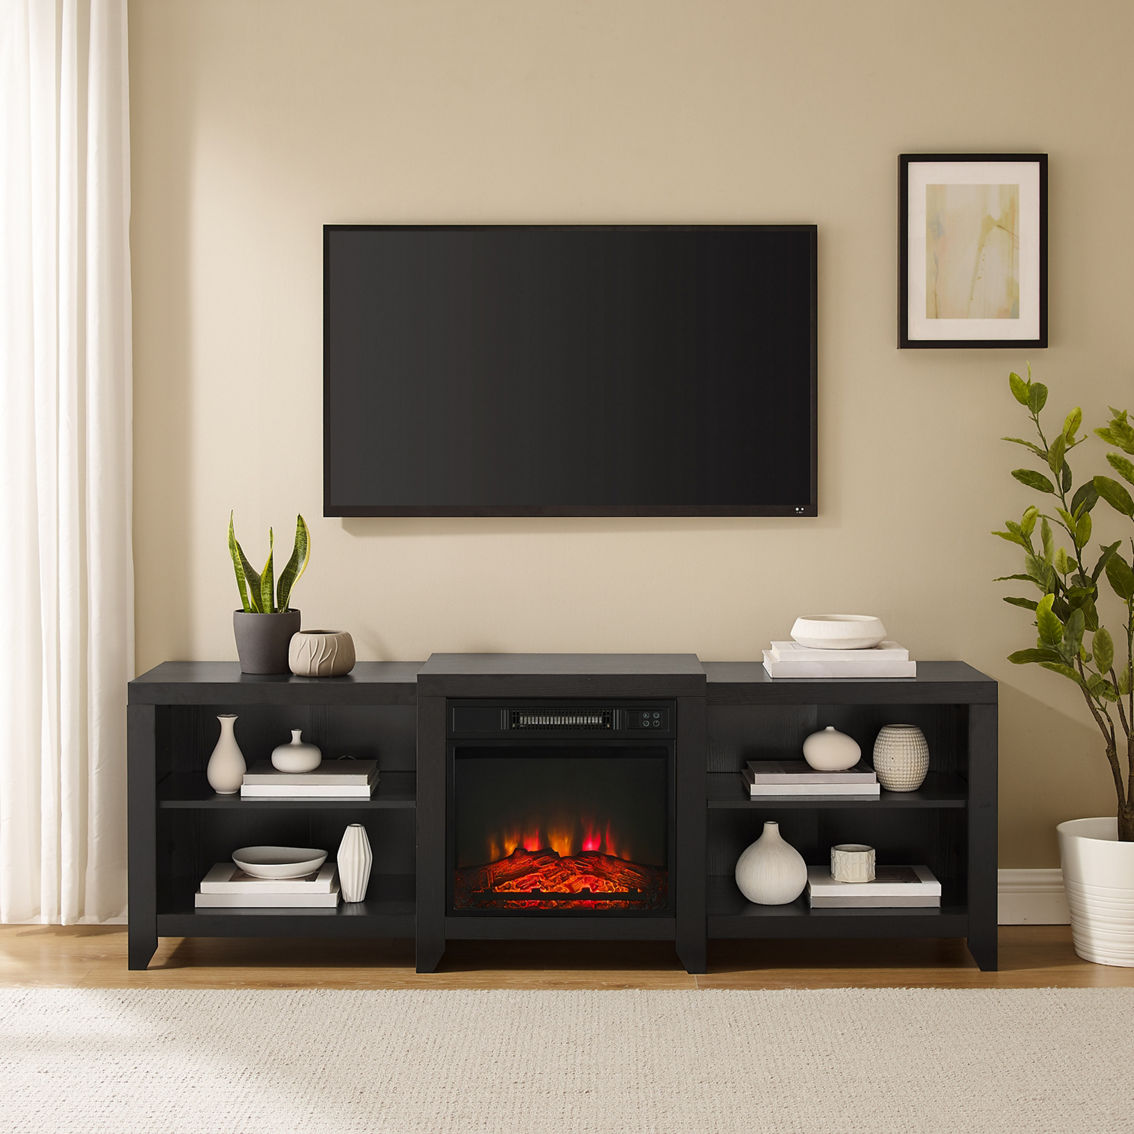 Crosley Furniture Ronin Low Profile TV Stand with Fireplace 69 in. - Image 5 of 6